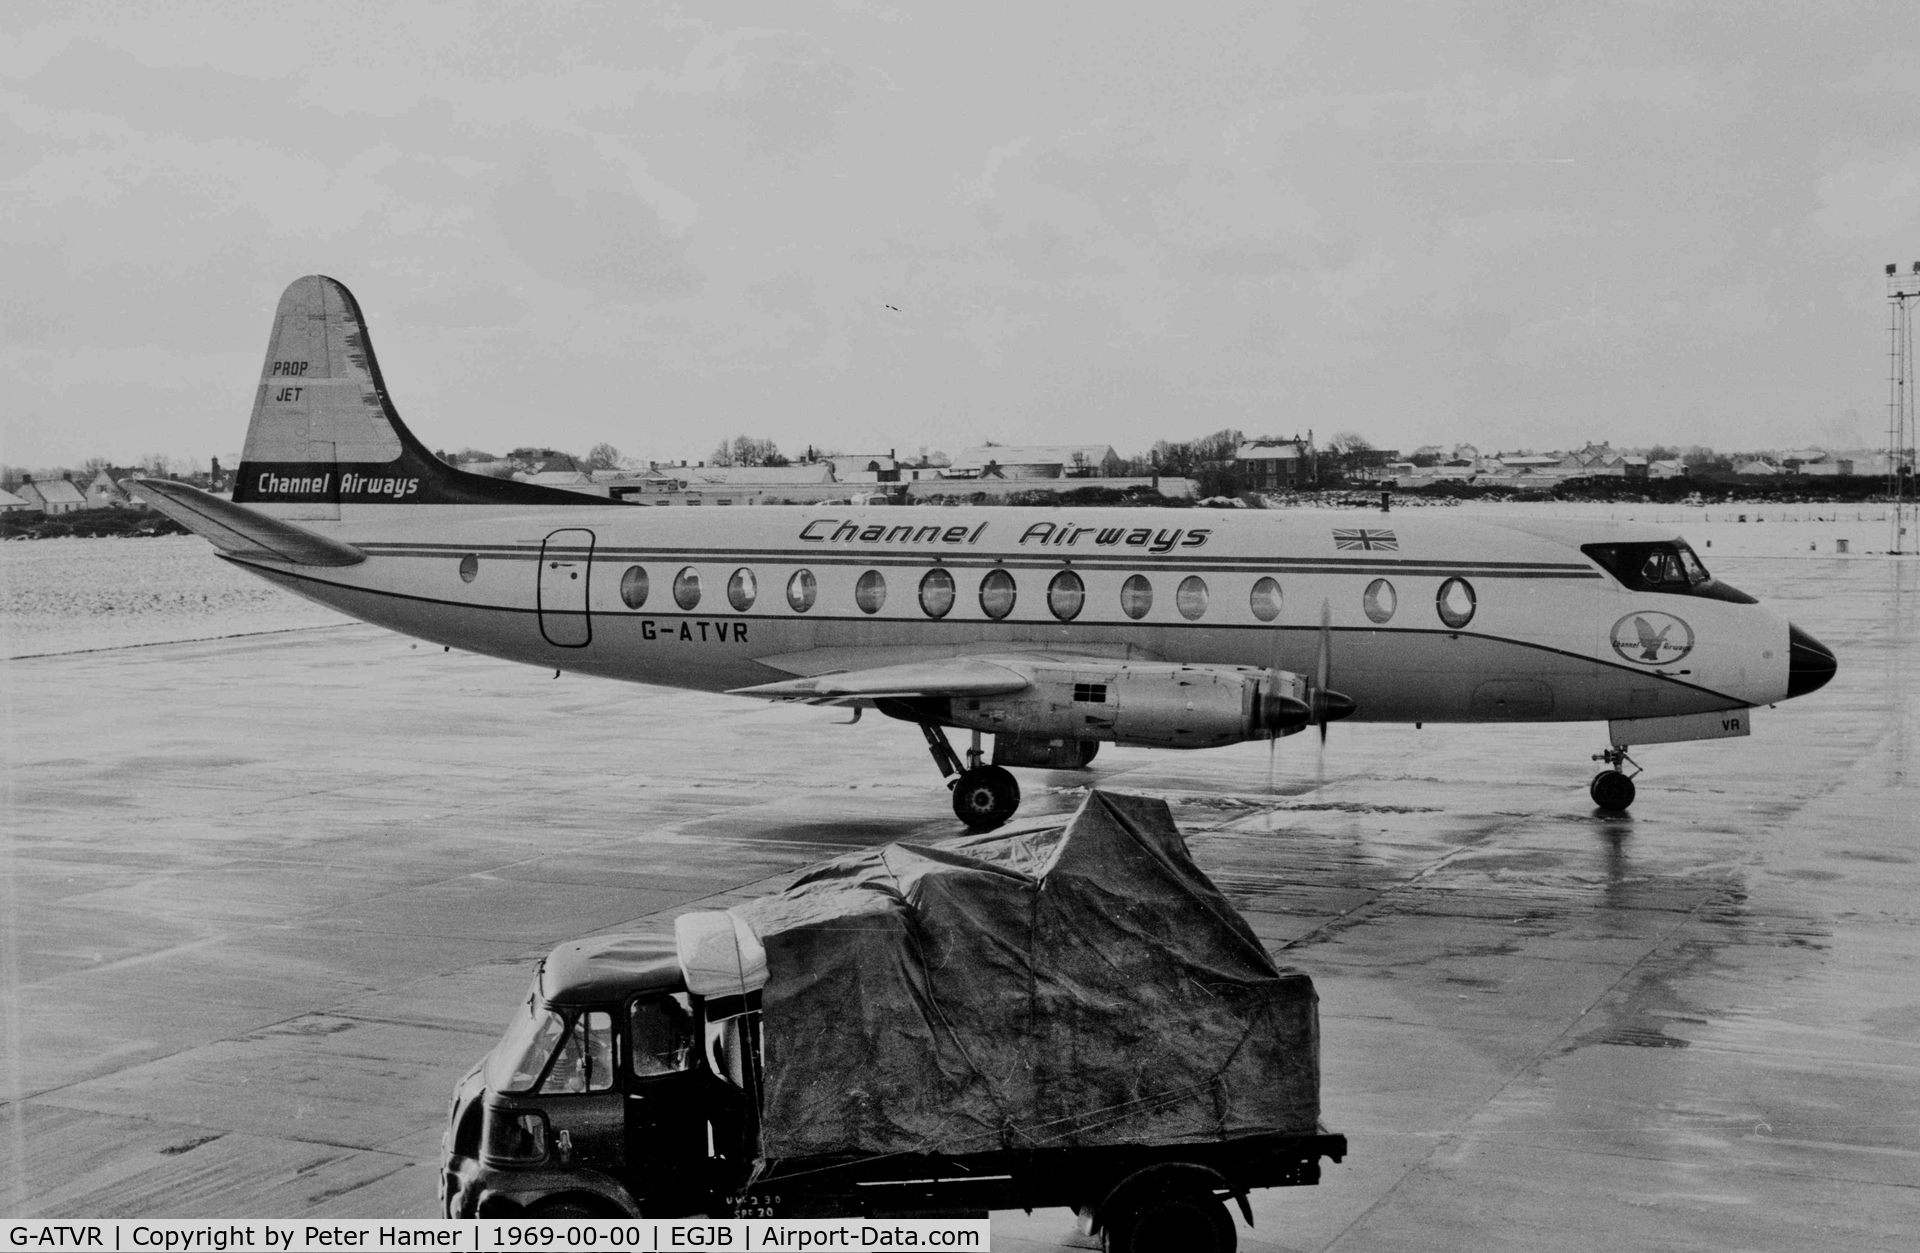 G-ATVR, 1958 Vickers Viscount 812 C/N 365, A rare snowy day at Guernsey in the 1960s